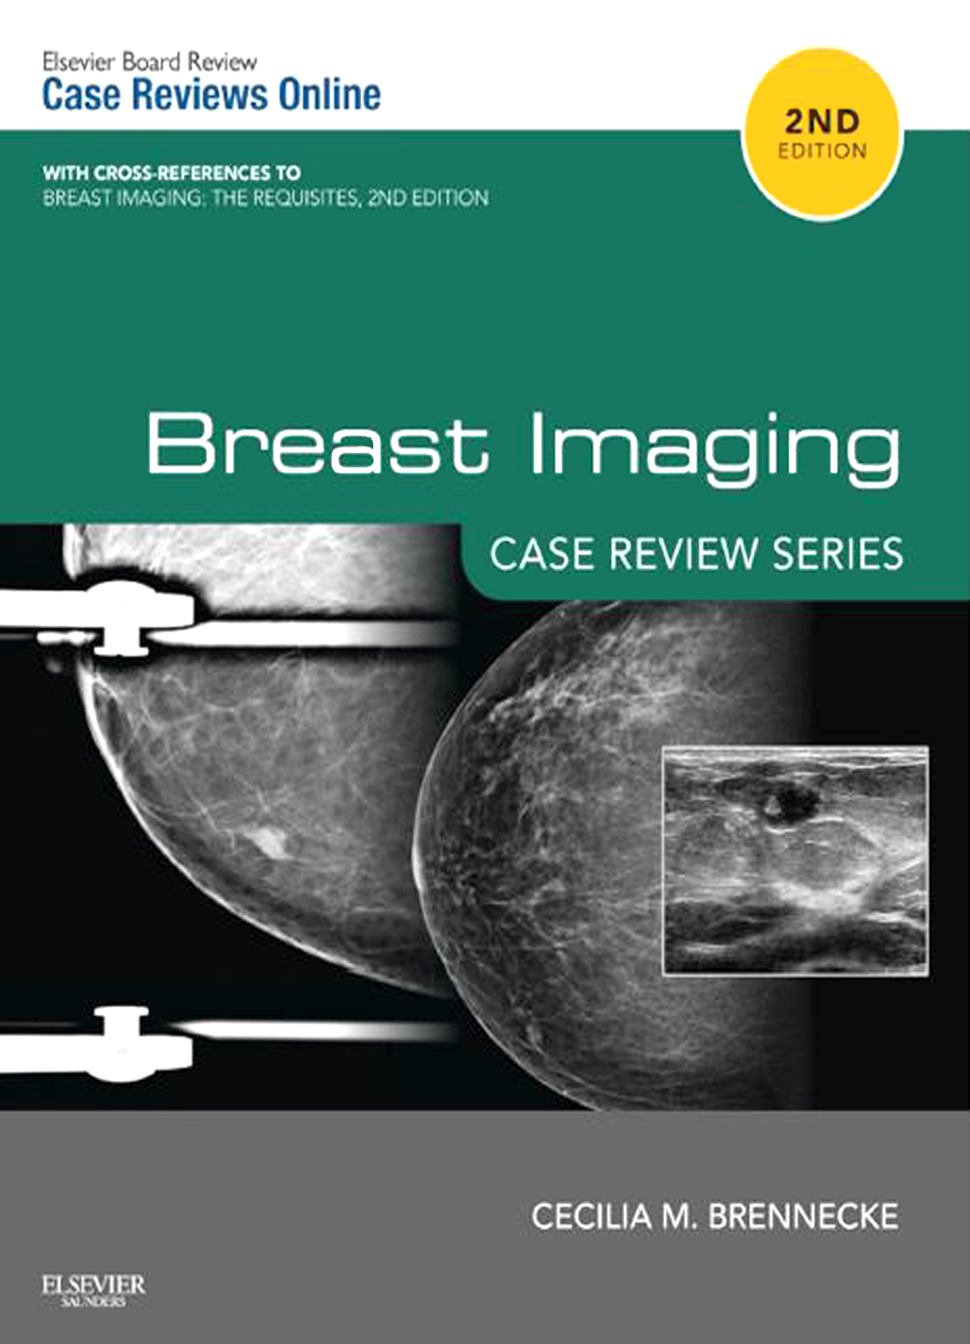 Only　Breast　Continuing　Review　Imaging　Scrubs　Case　Emailed　Test　Series　Education®